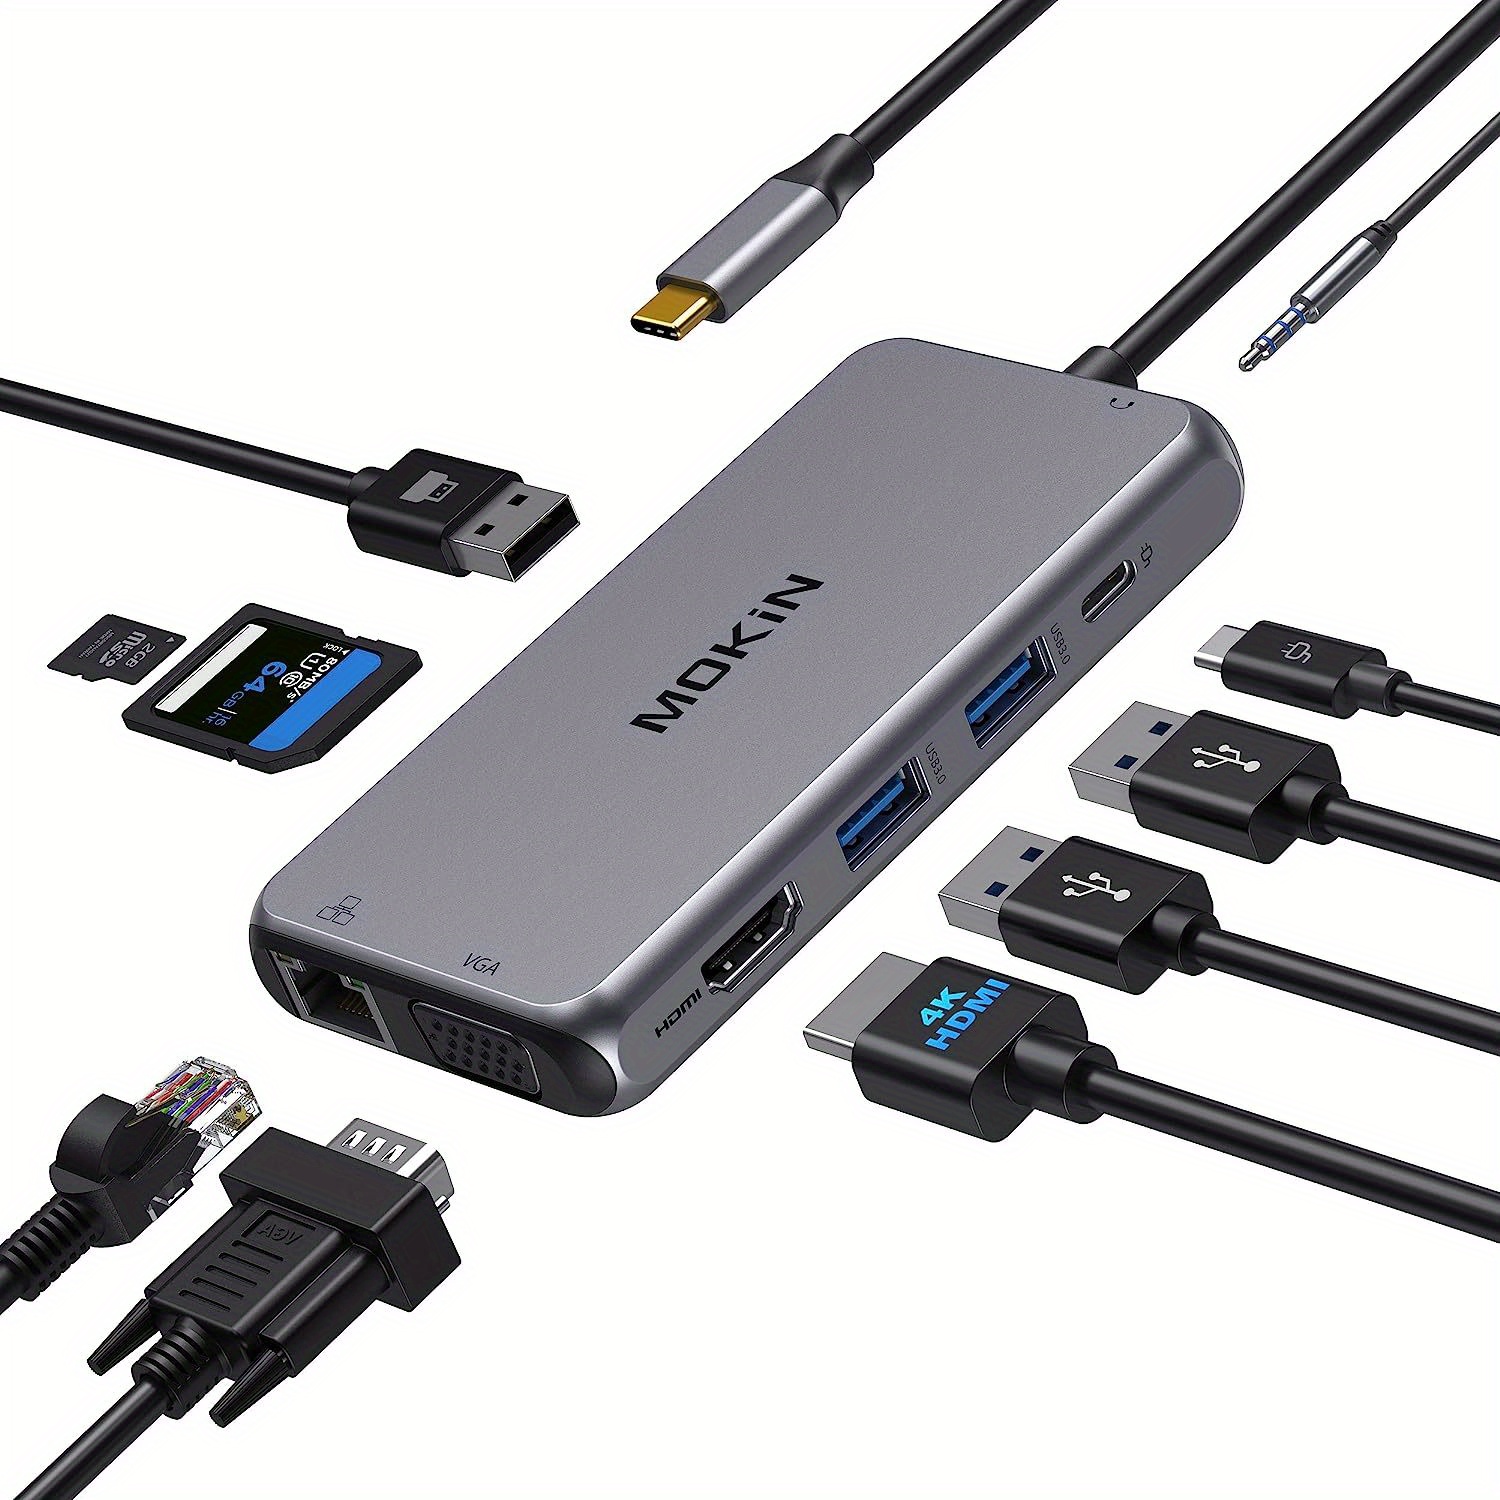 MOKiN USB C Hub HDMI Adapter for MacBook Pro/Air, 7 in 1 USB C Dongle with  HDMI, SD/TF Card Reader, USB C Data Port,100W PD, and 2 USB 3.0 Compatible